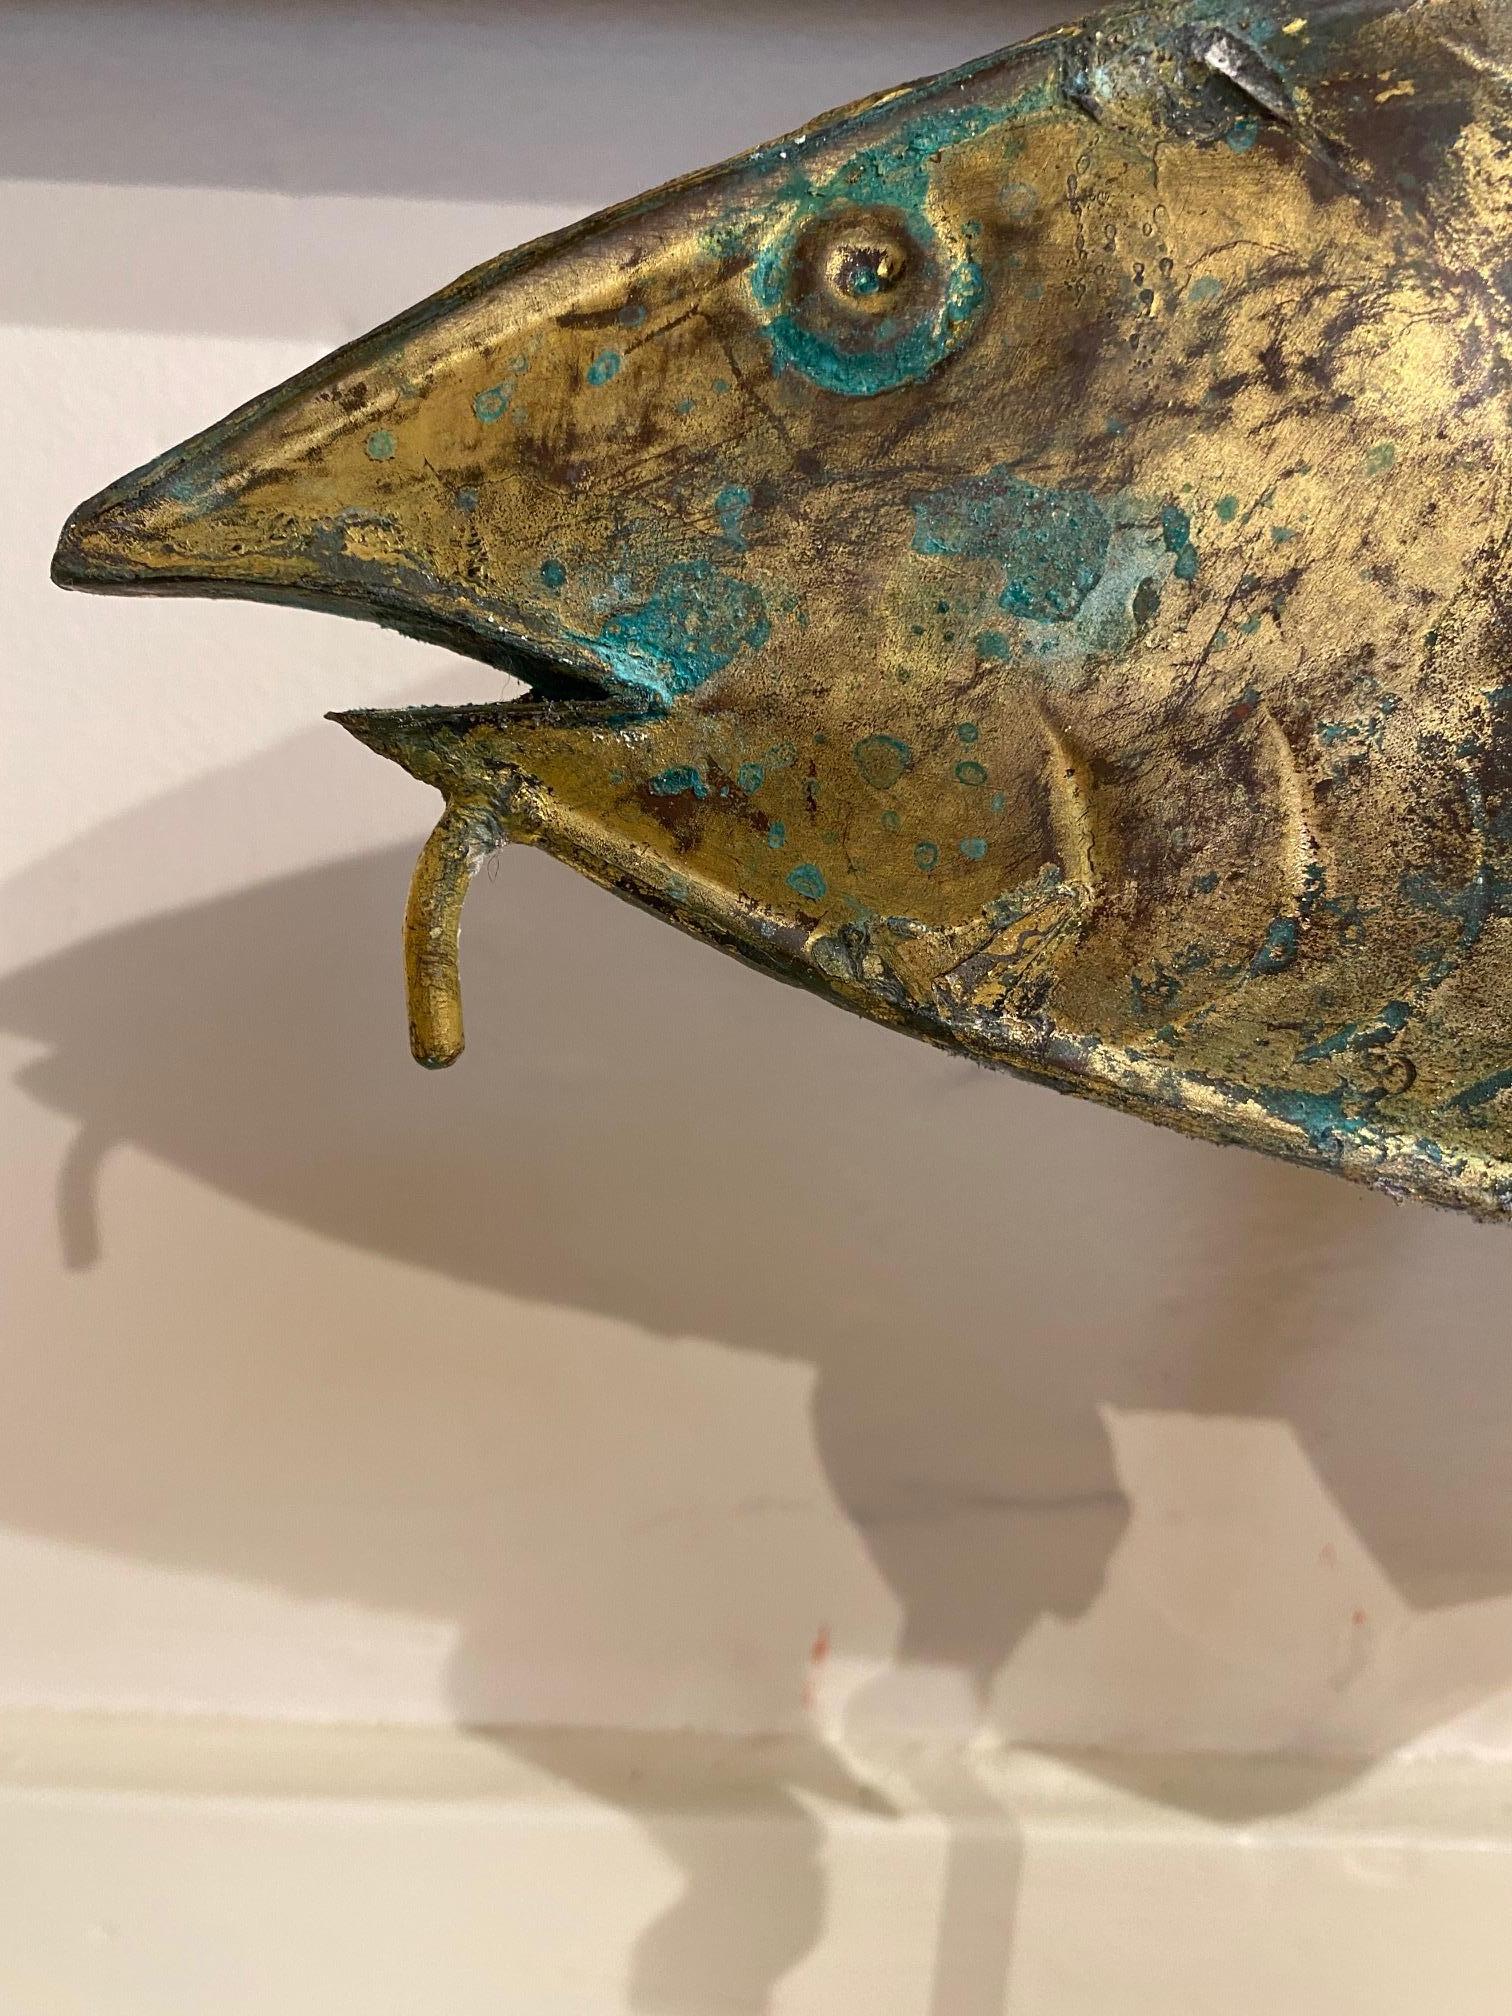 Antique gilded metal codfish weather vane, circa 1910, cast and welded sheet metal, likely zinc, forming a three dimensional embossed hollow codfish with three proud dorsal fins, large scales and chin barbel, in what looks like the original gilt